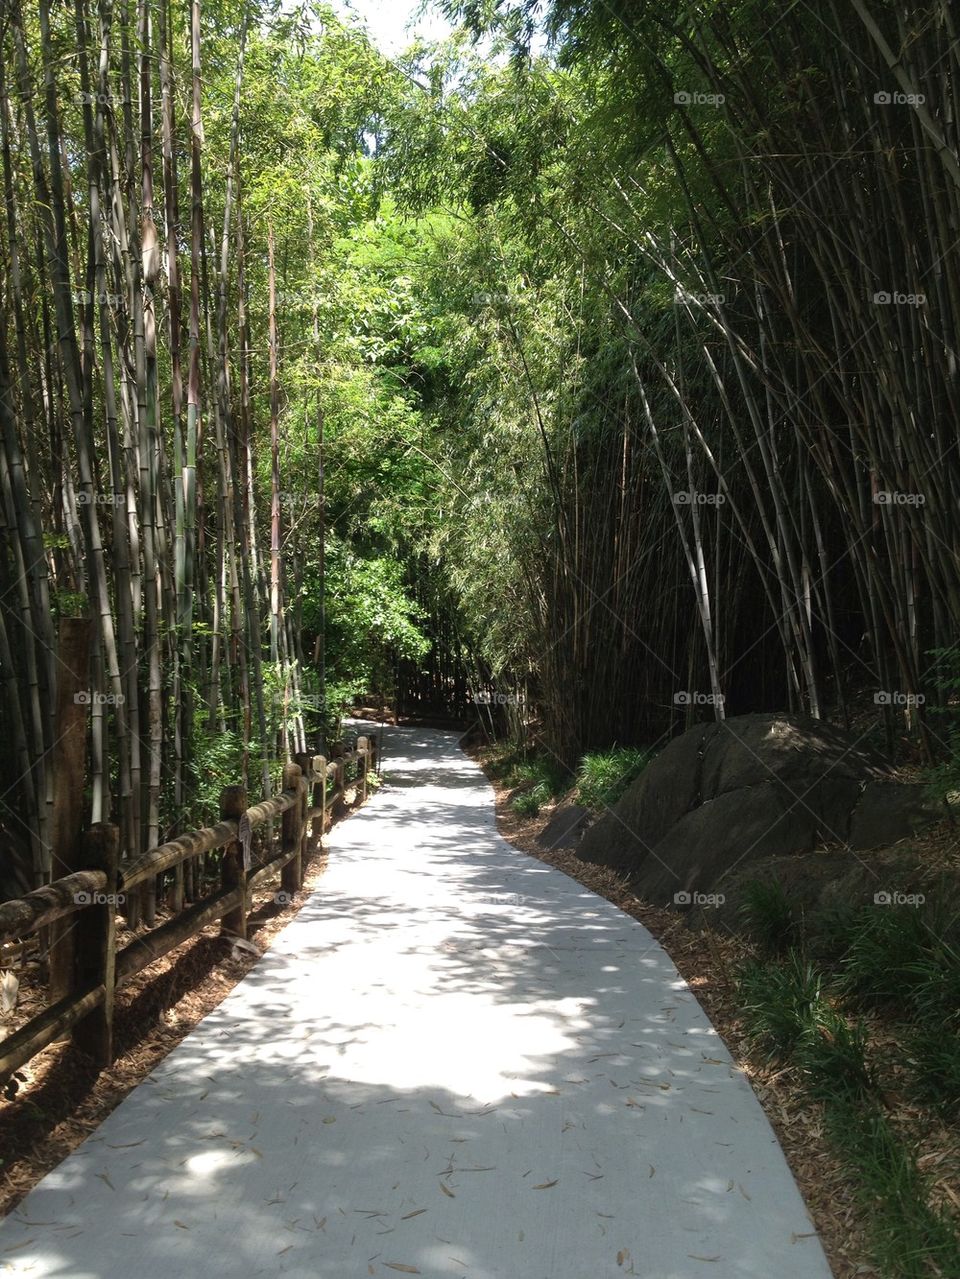 Bamboo trail at Knoxville Zoo.